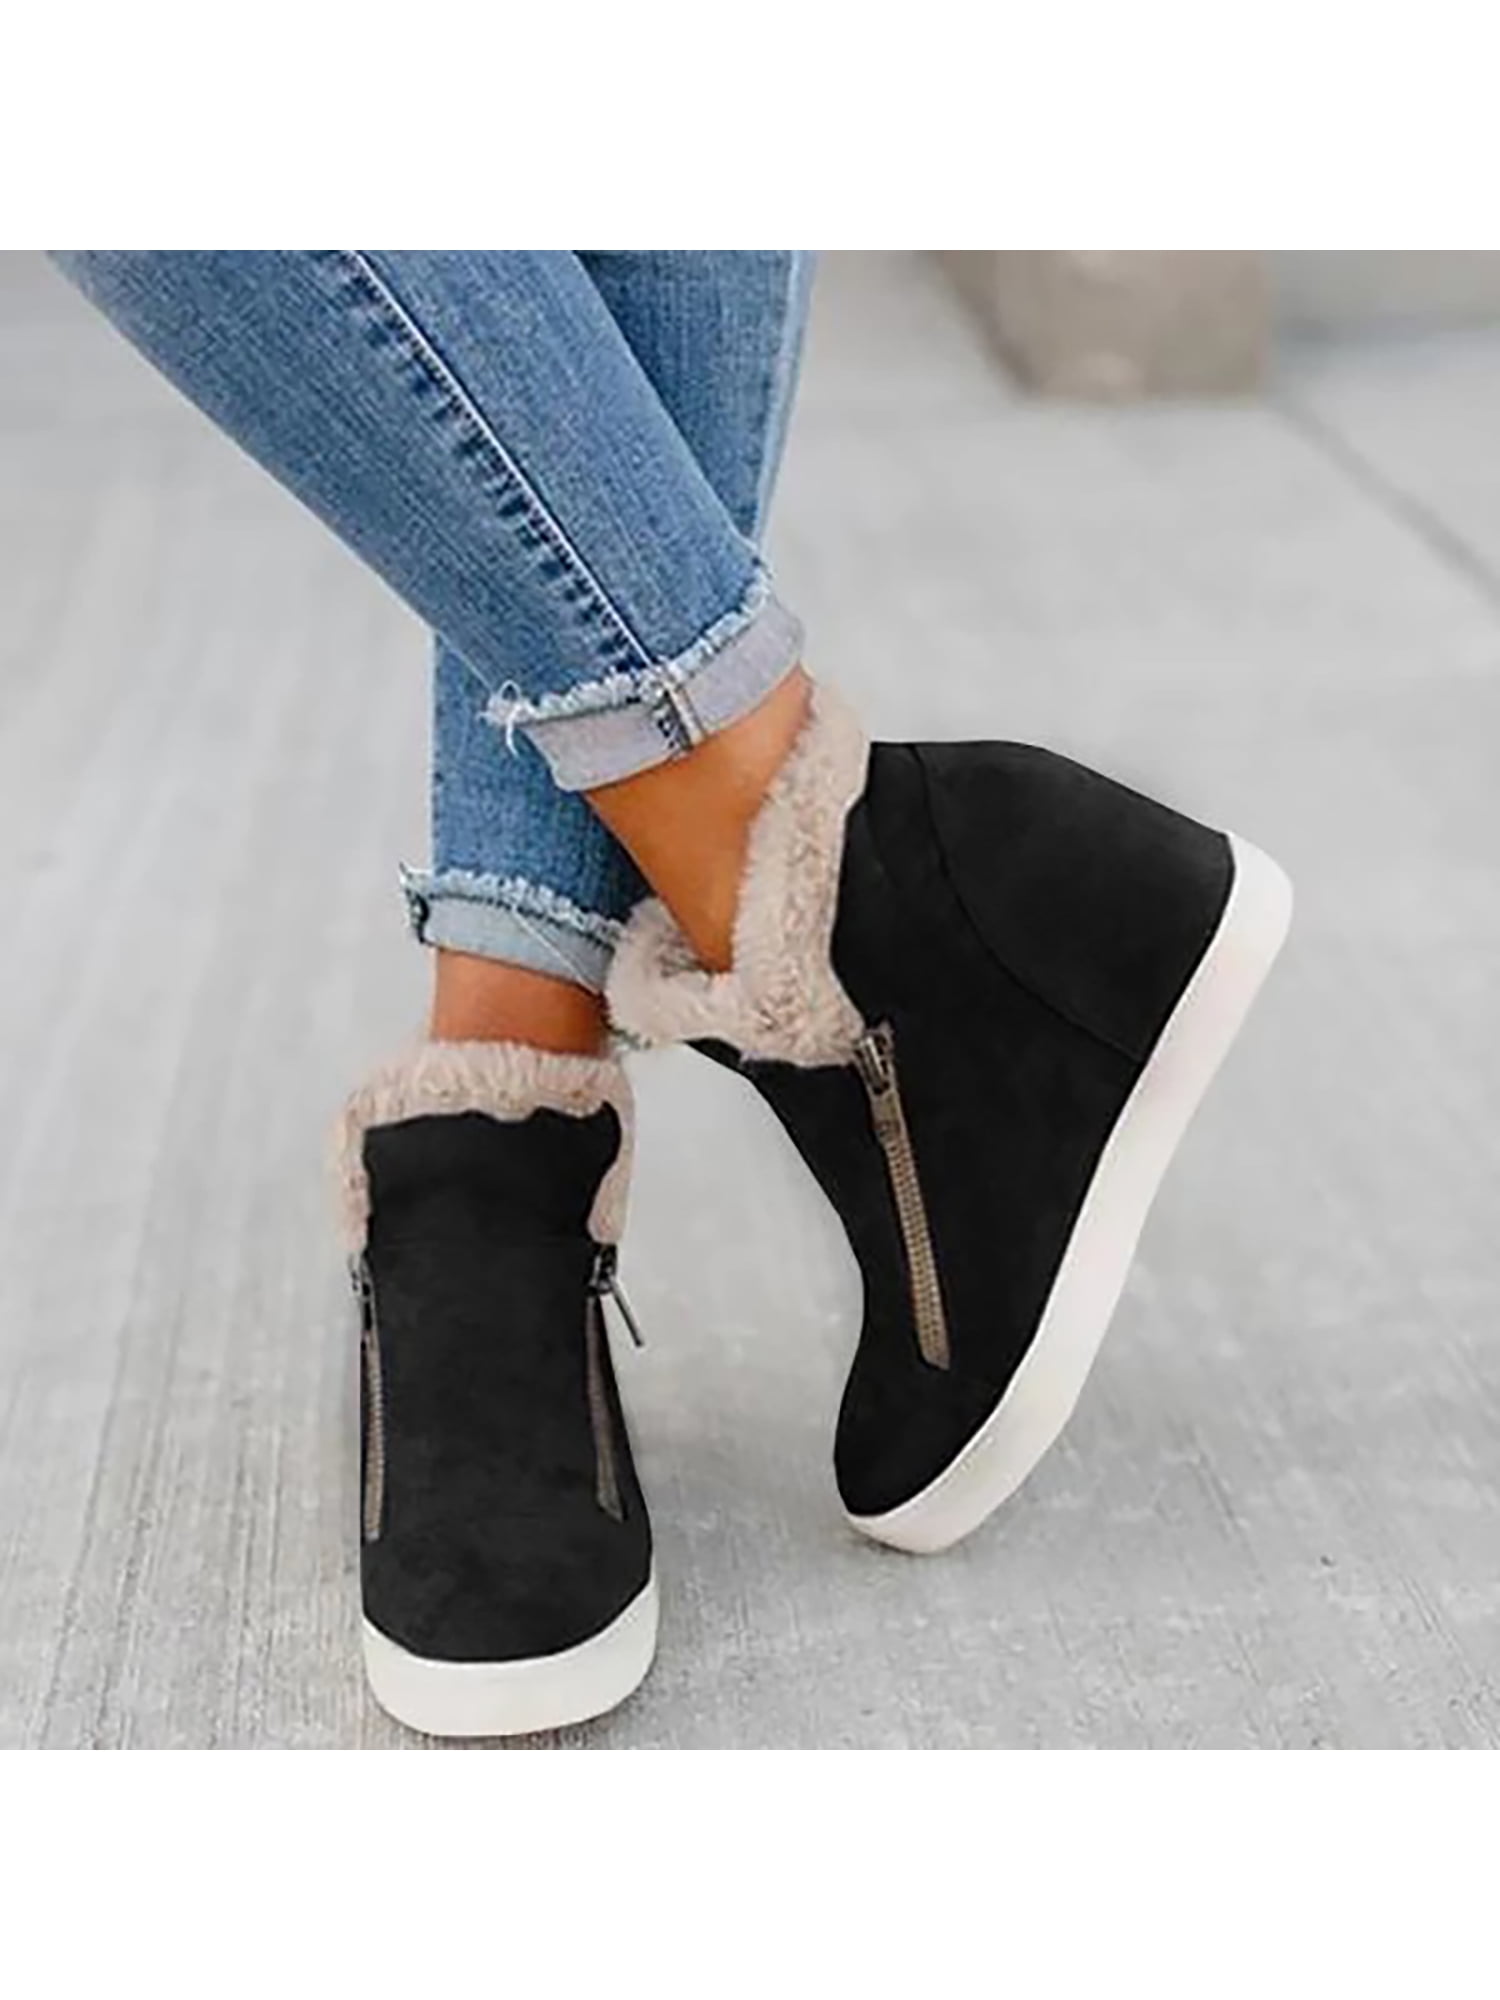 Women Shoes Ladies Sneakers Party Hidden Wedge Shoes Ankle Boots High Top 